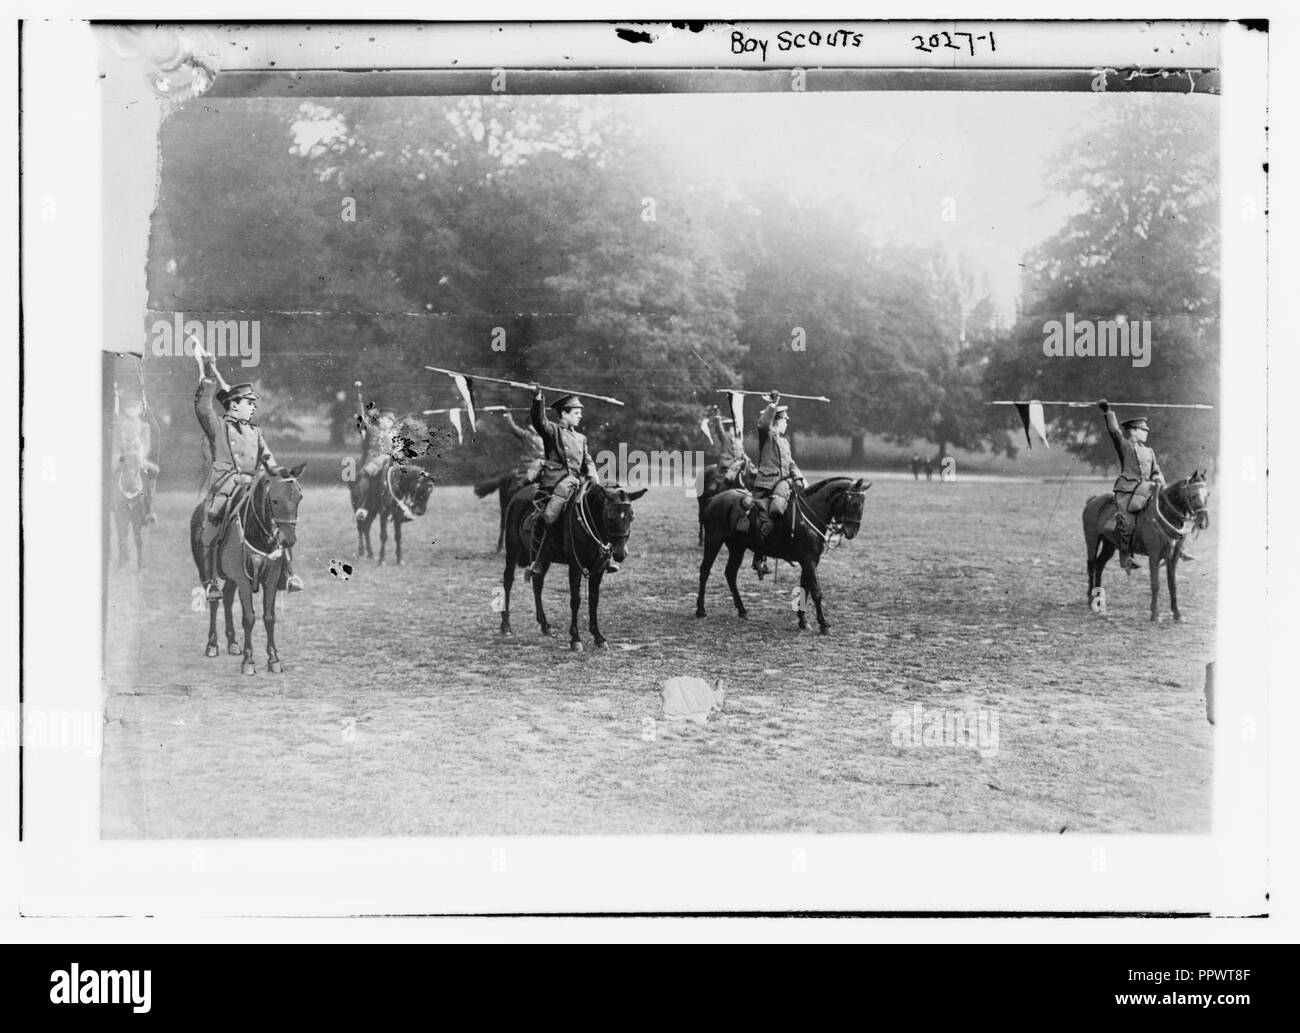 Boy Scouts. On Horseback with spears held aloft. Stock Photo